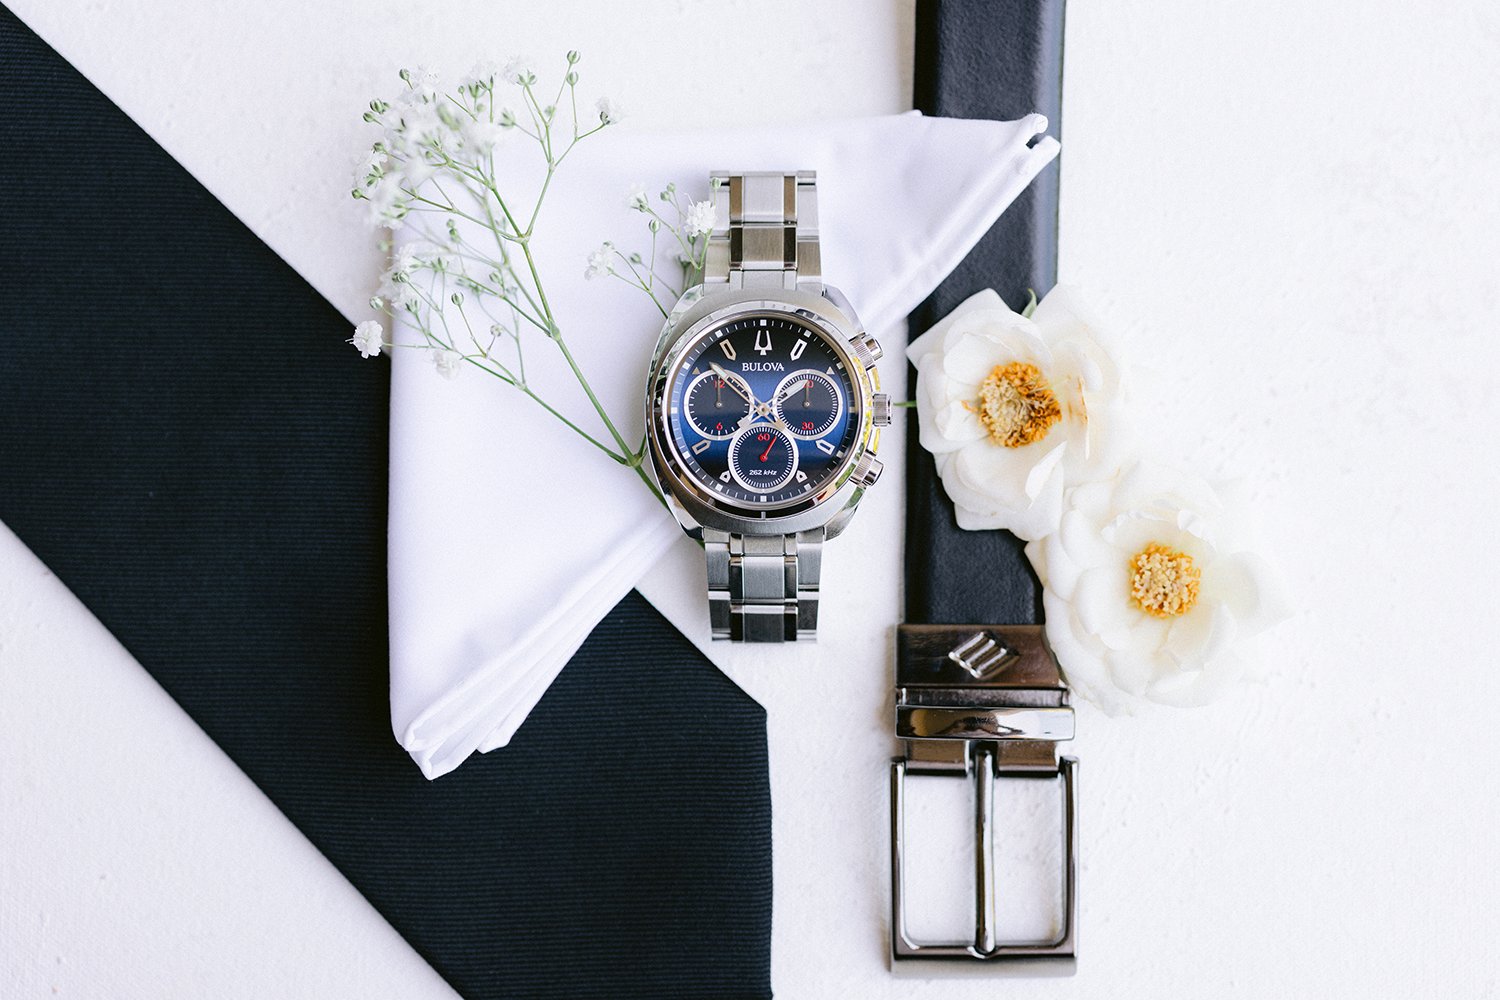 17 detail flatlay photography of groom's accesories for the wedding, bulova watch, belt and tie at Dreams Riviera Cancun.JPG